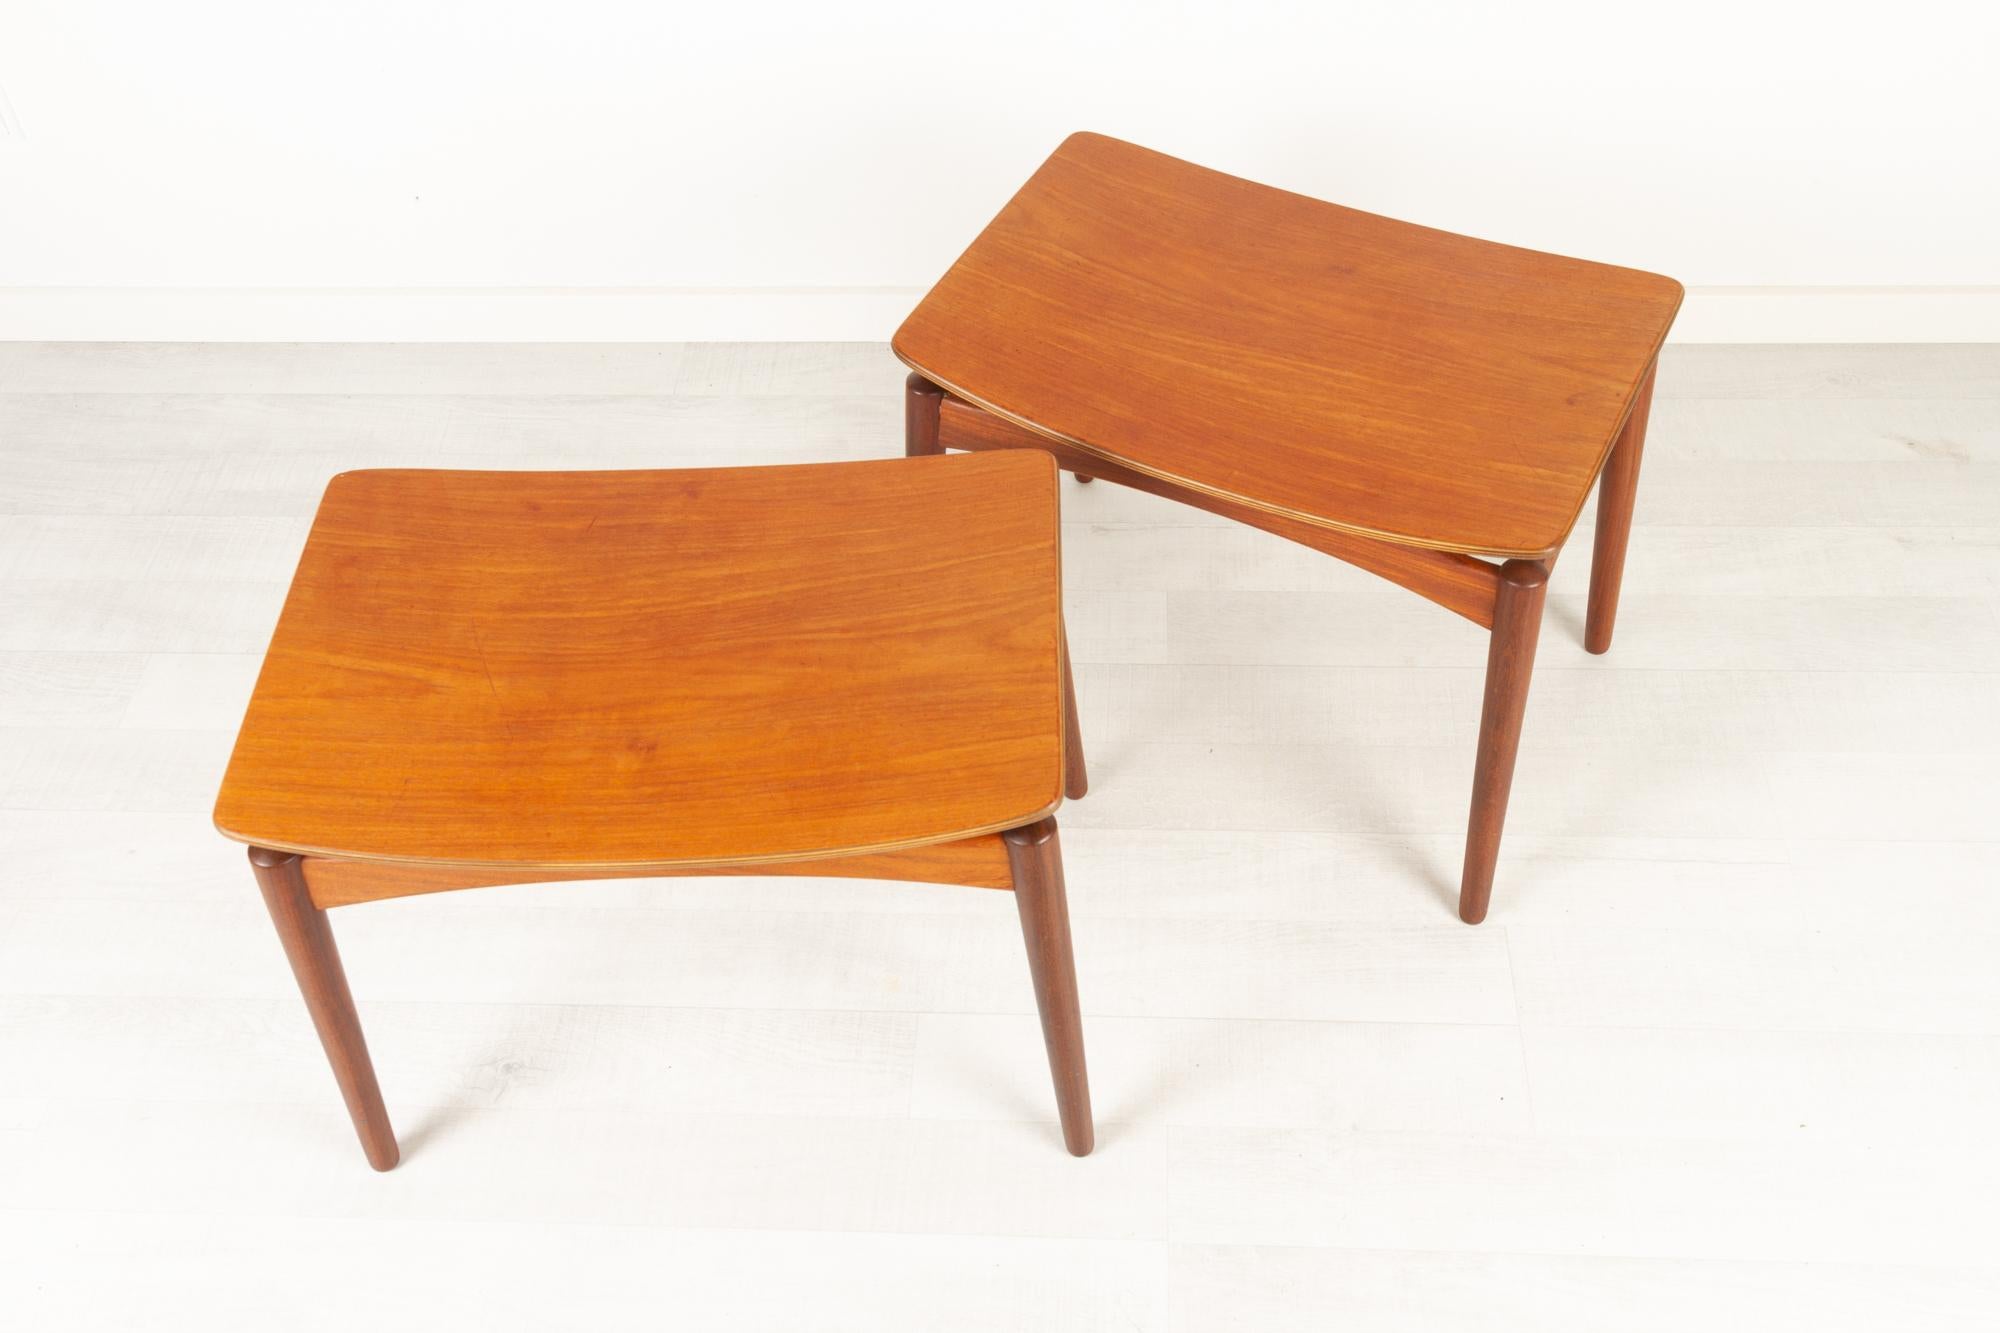 Vintage Danish Teak Footstools by Sigfred Omann for Ølholm 1950s Set of 2 In Good Condition For Sale In Asaa, DK